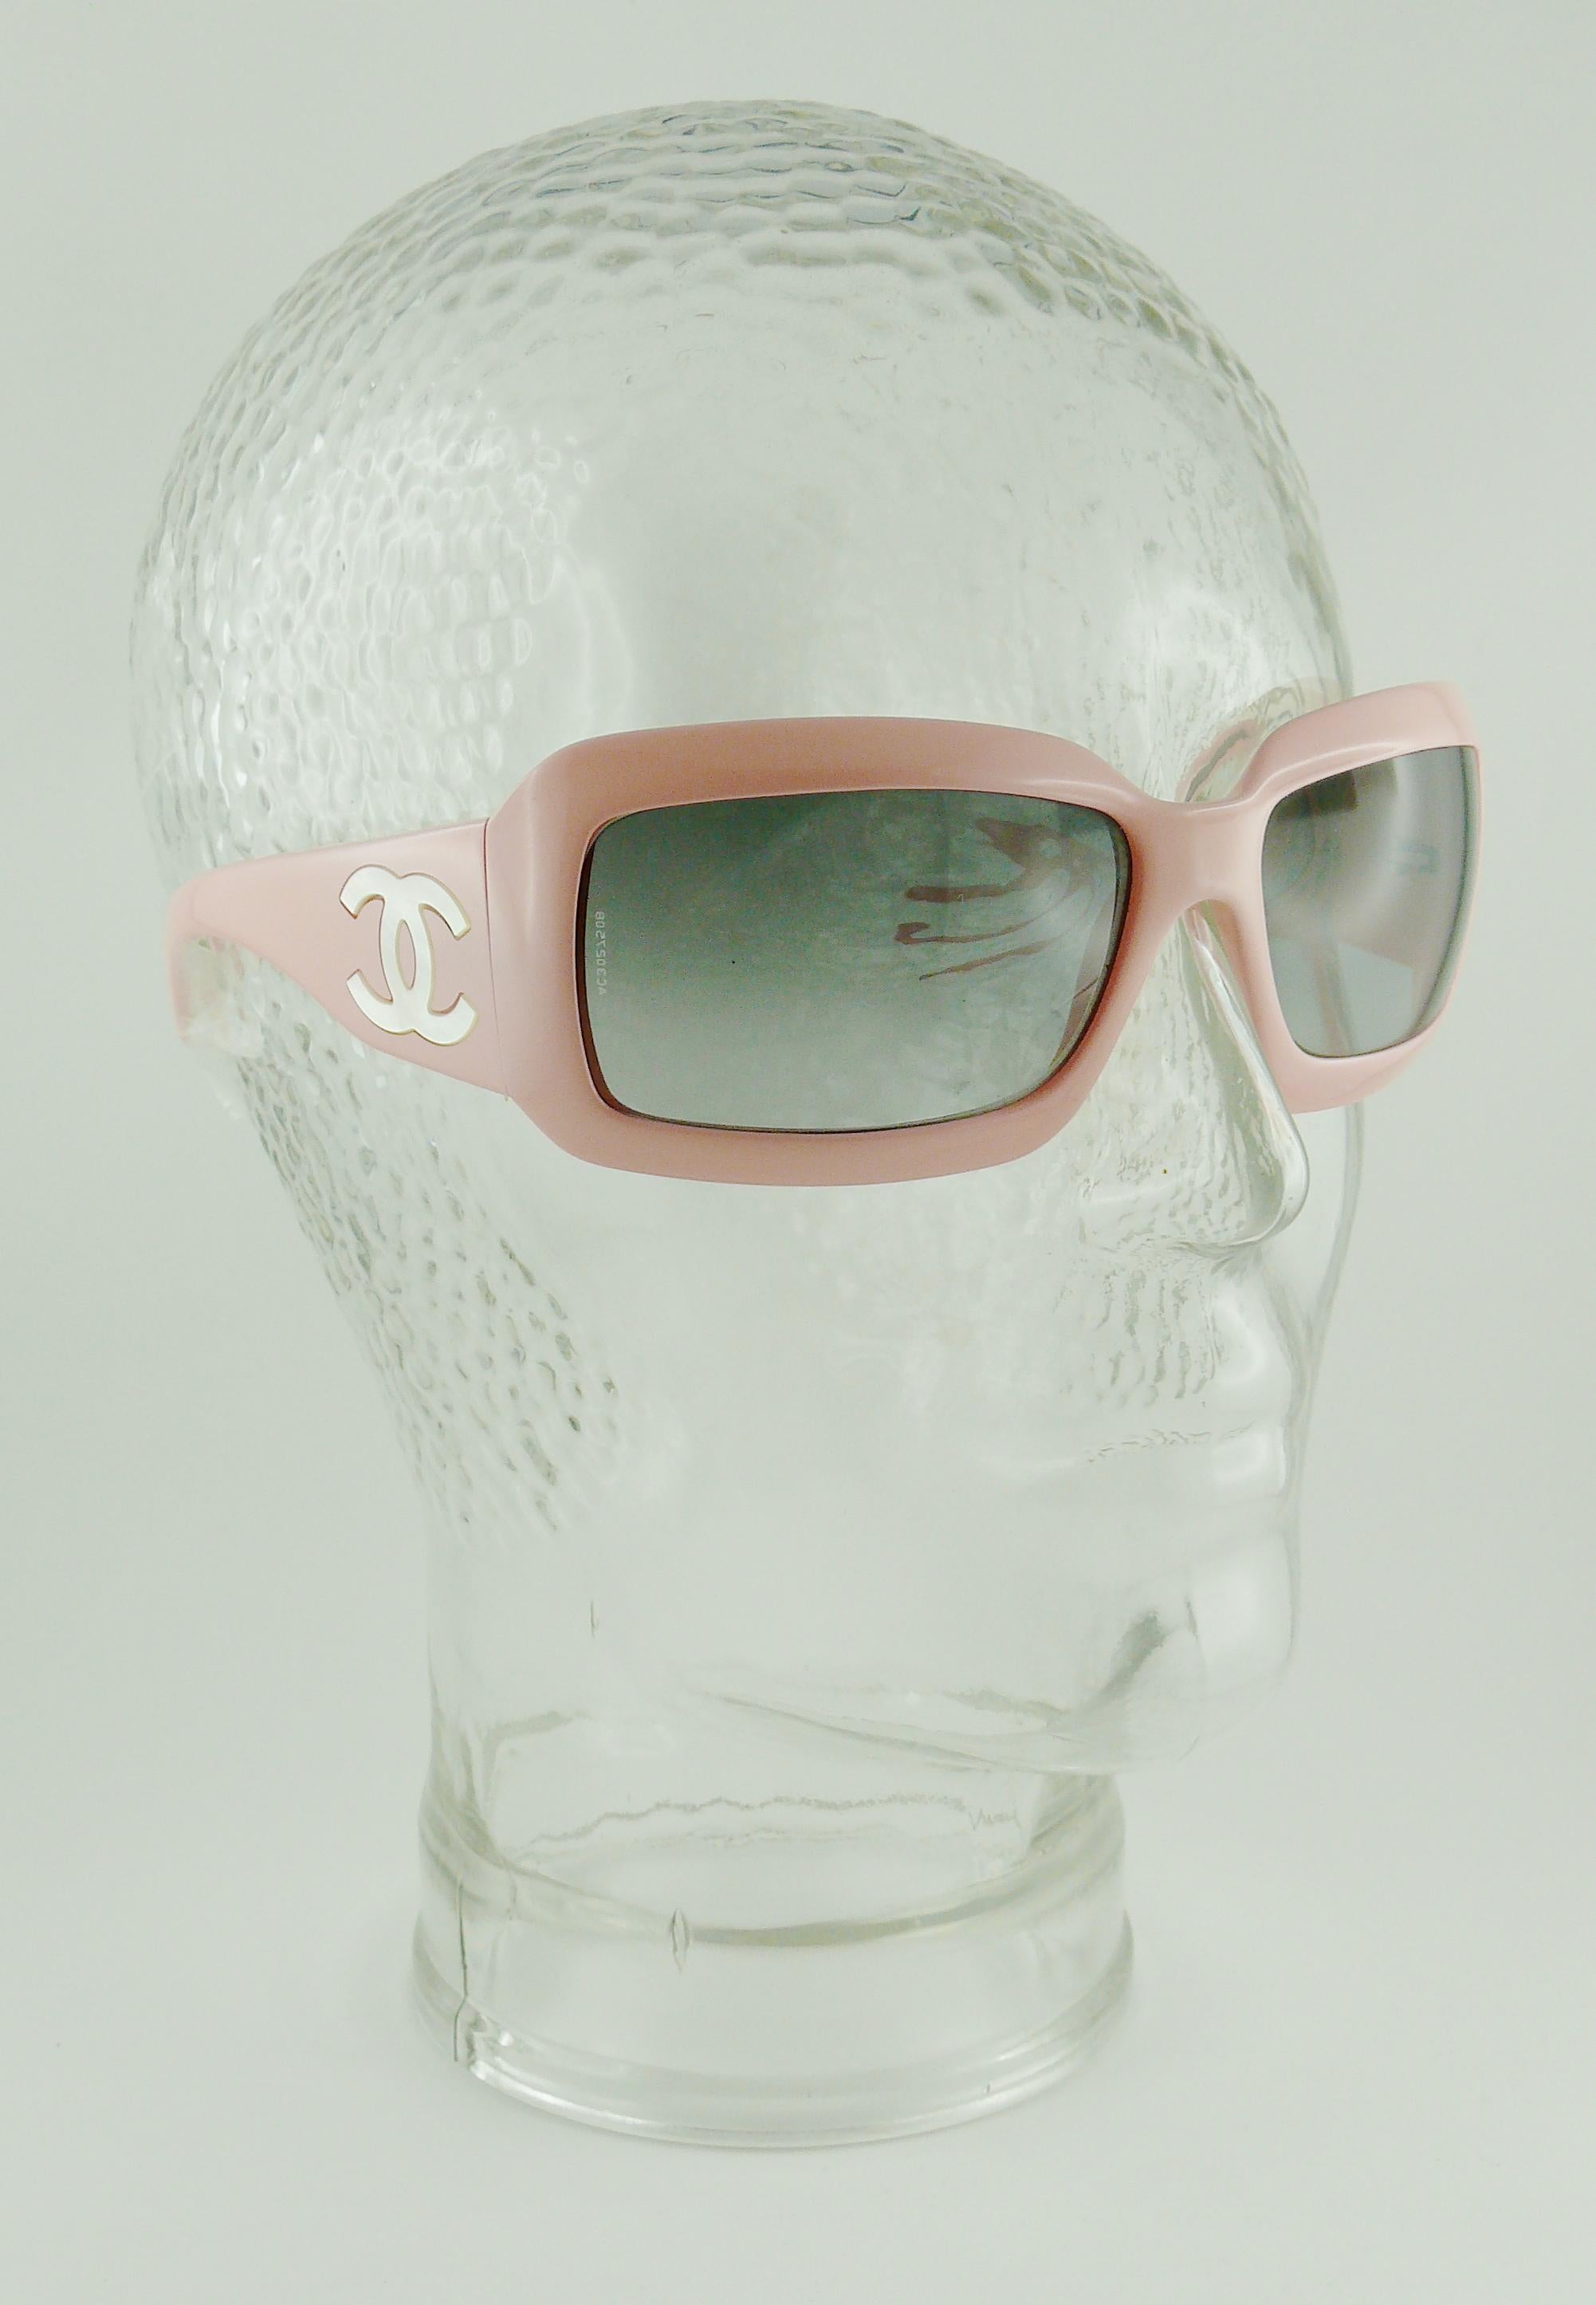 **** WE NO LONGER SHIP SUNGLASSES TO THE USA ****

CHANEL baby pink acrylic sunglasses adorned with large CC logo on both temple.

Grey gradient plastic lenses.

Marked CHANEL Made in Italy.
Mod. 5076-H.

Engraved CHANEL on both lenses.

Indicative